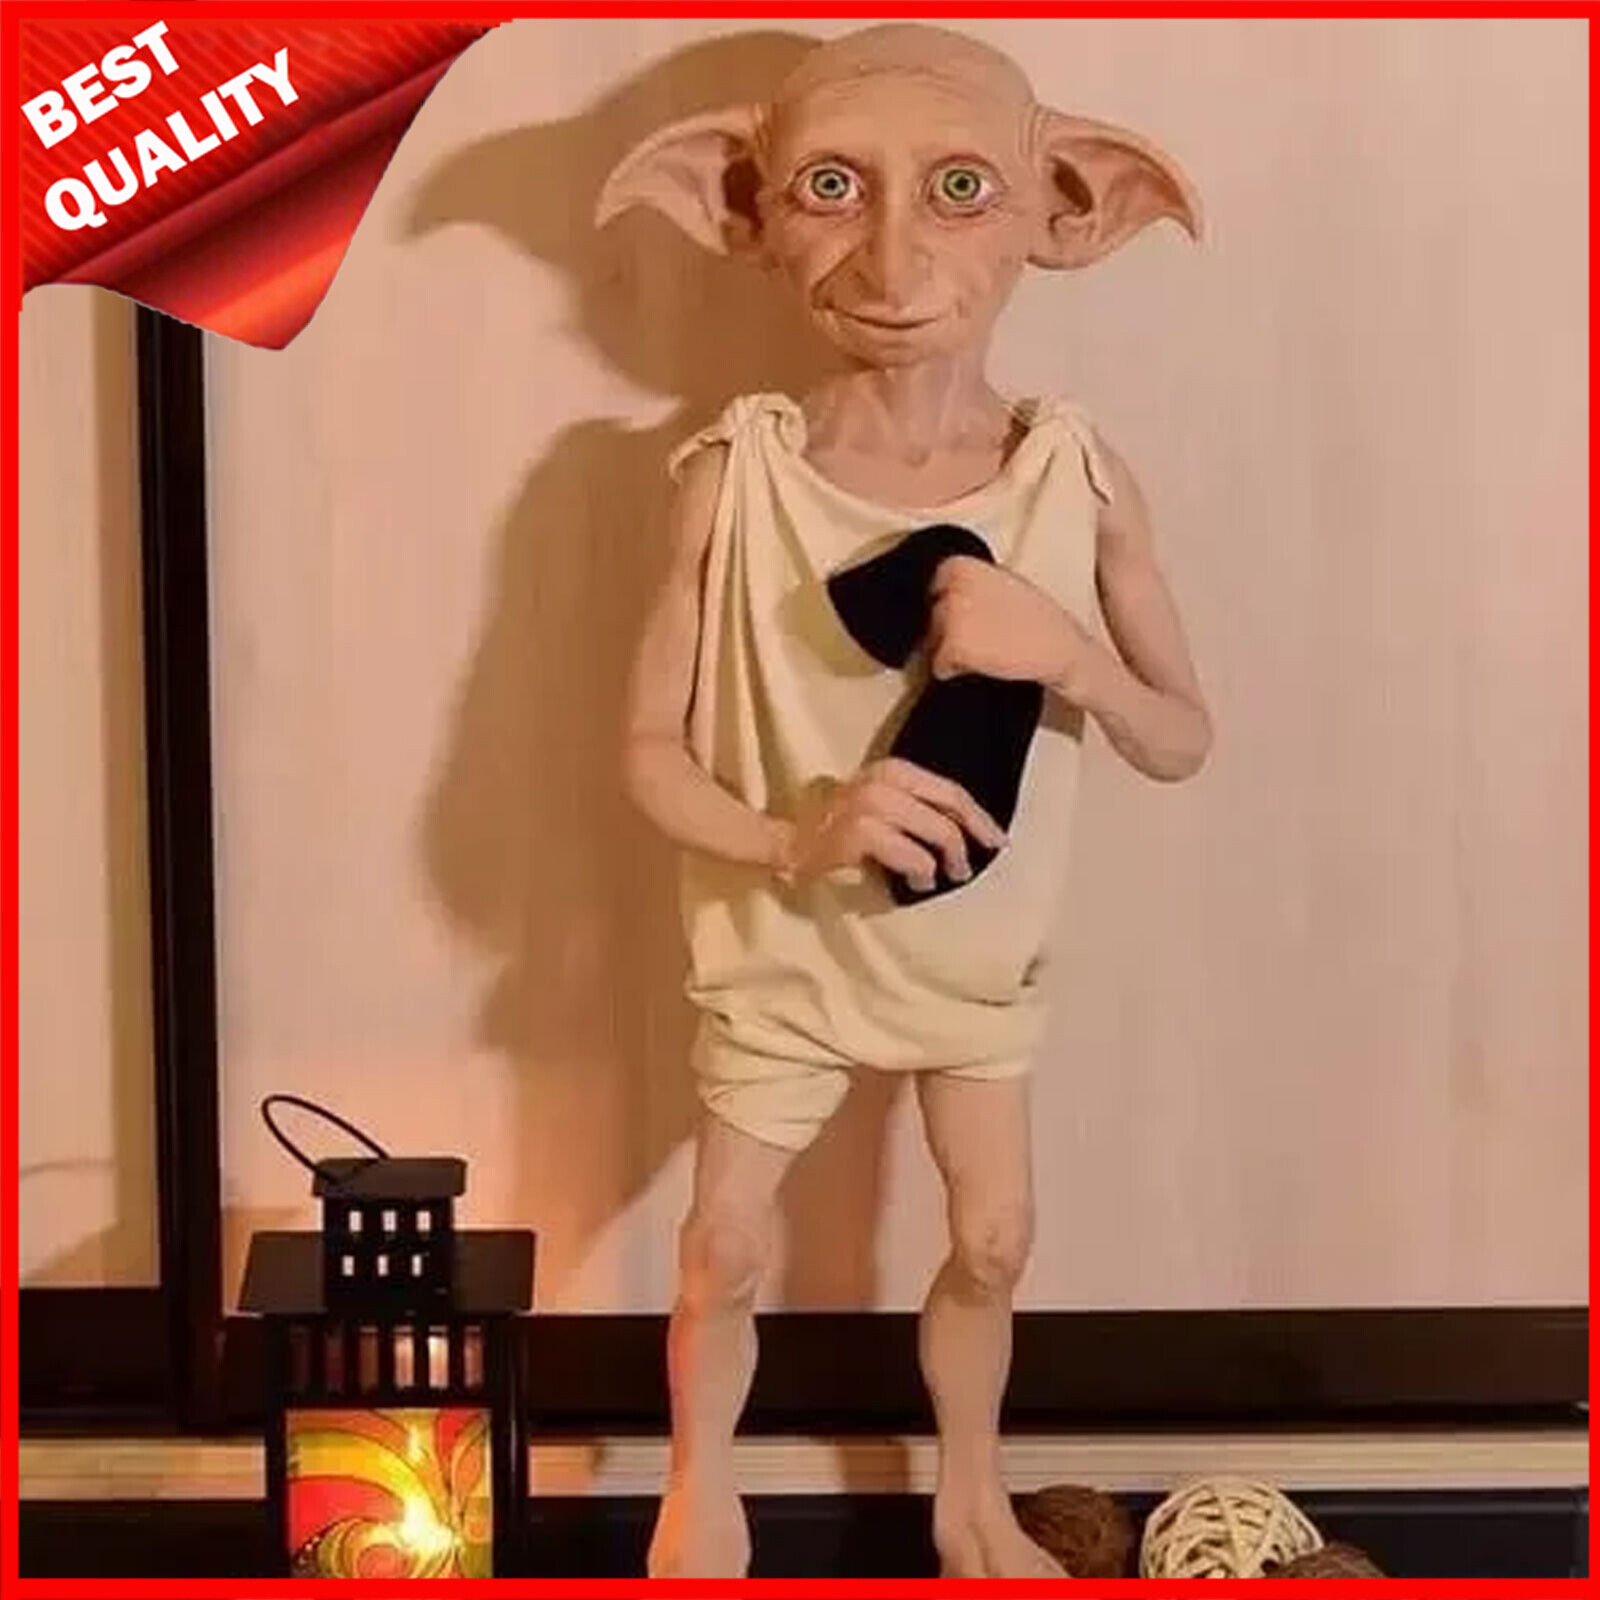 Harry Potter Dobby The House Elf Figure Model Doll Toy Wizarding World Toys 